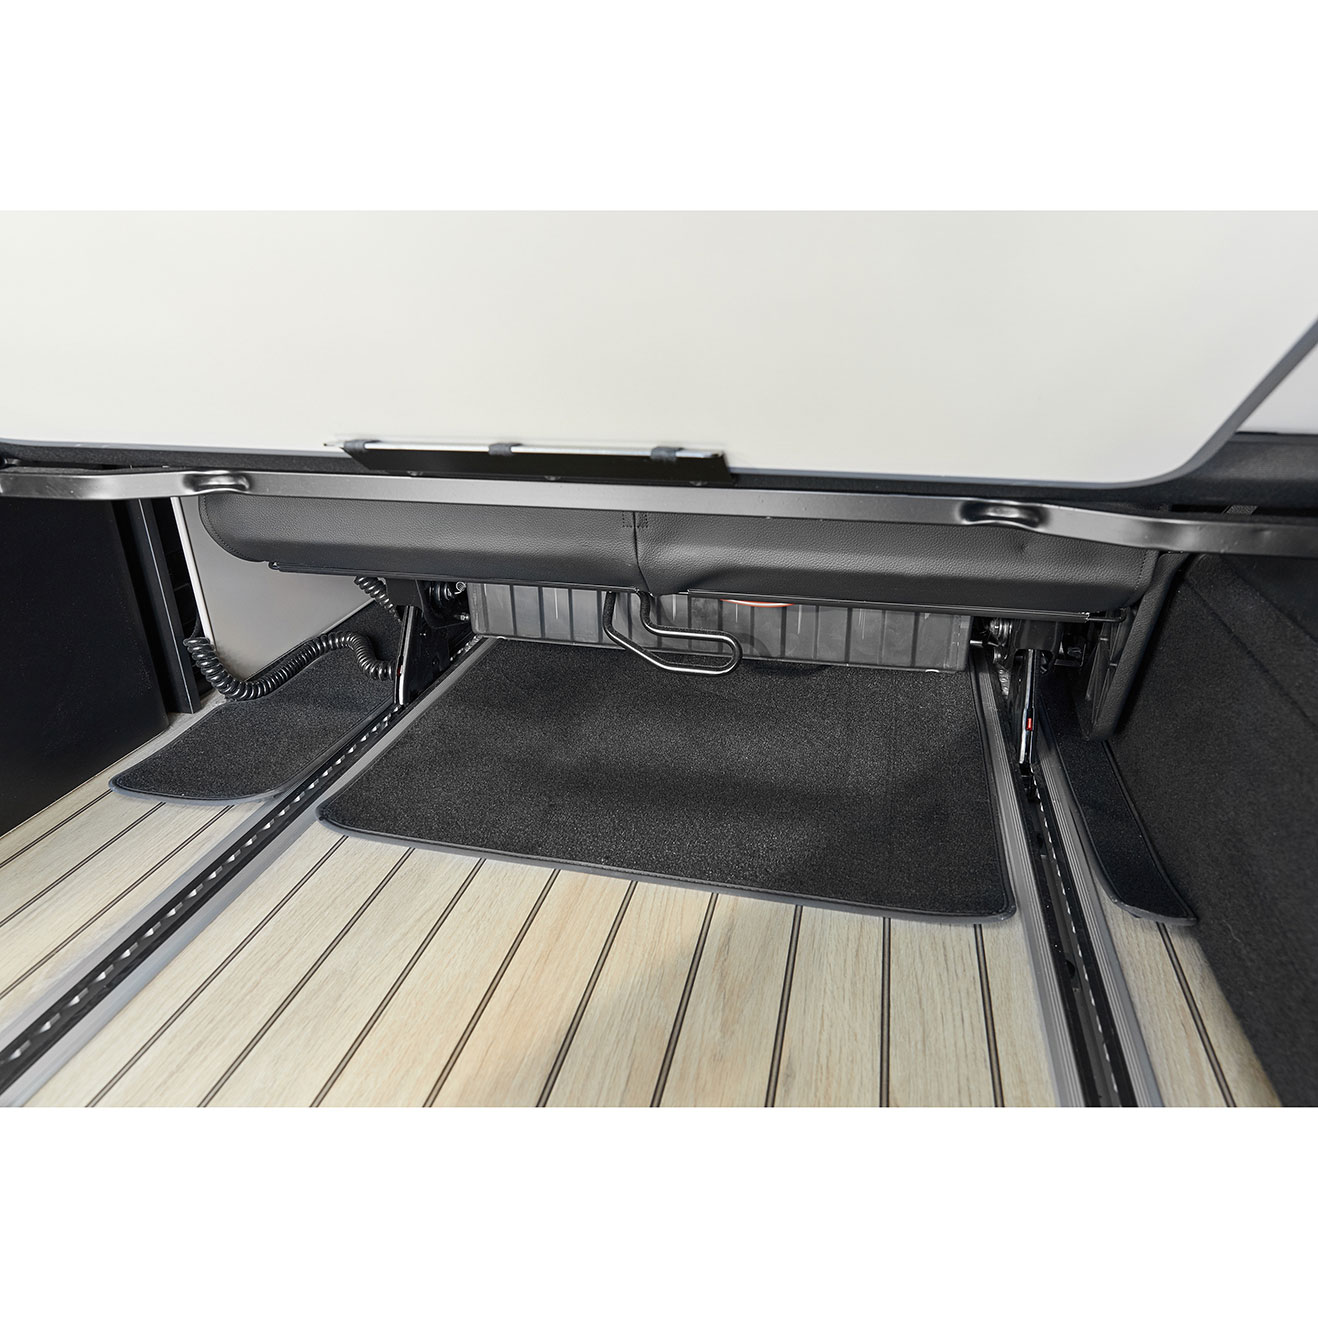 Mercedes-Benz Marco-Polo floor mats - High-quality velor floor mats for  your passenger compartment